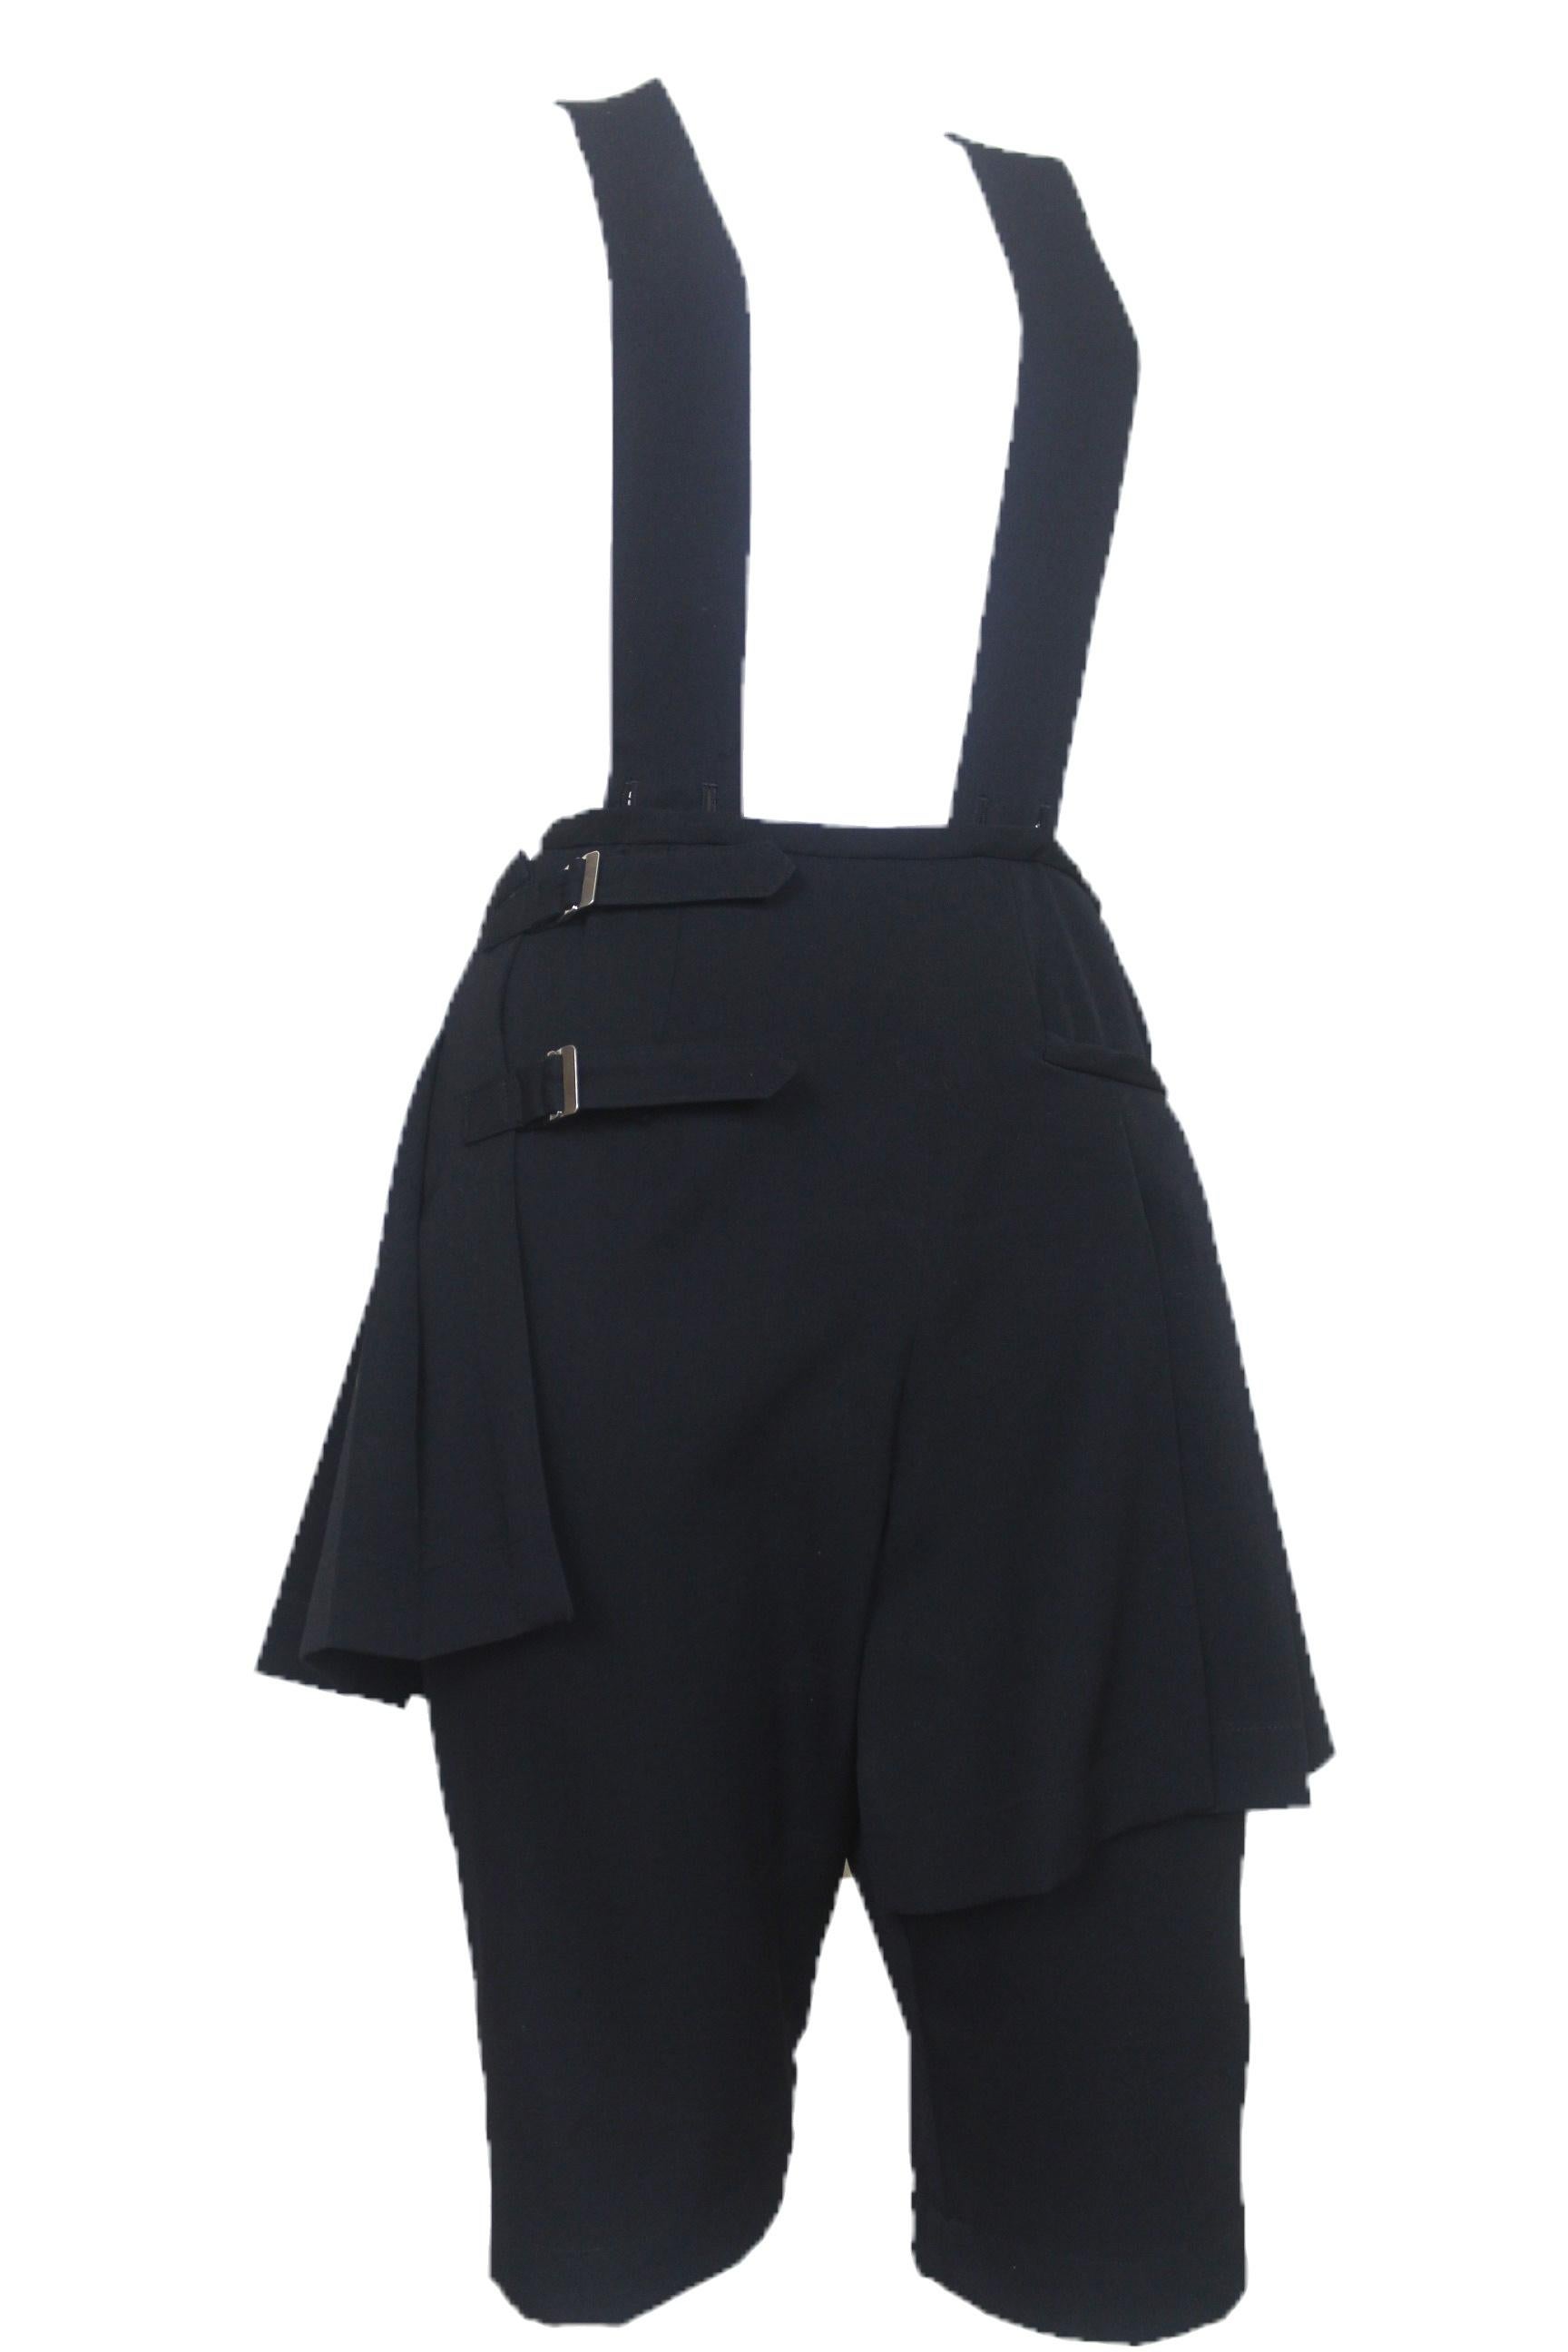 Comme des Garcons 1989 Collection Reverse Dungarees with attached Skirt For Sale 4